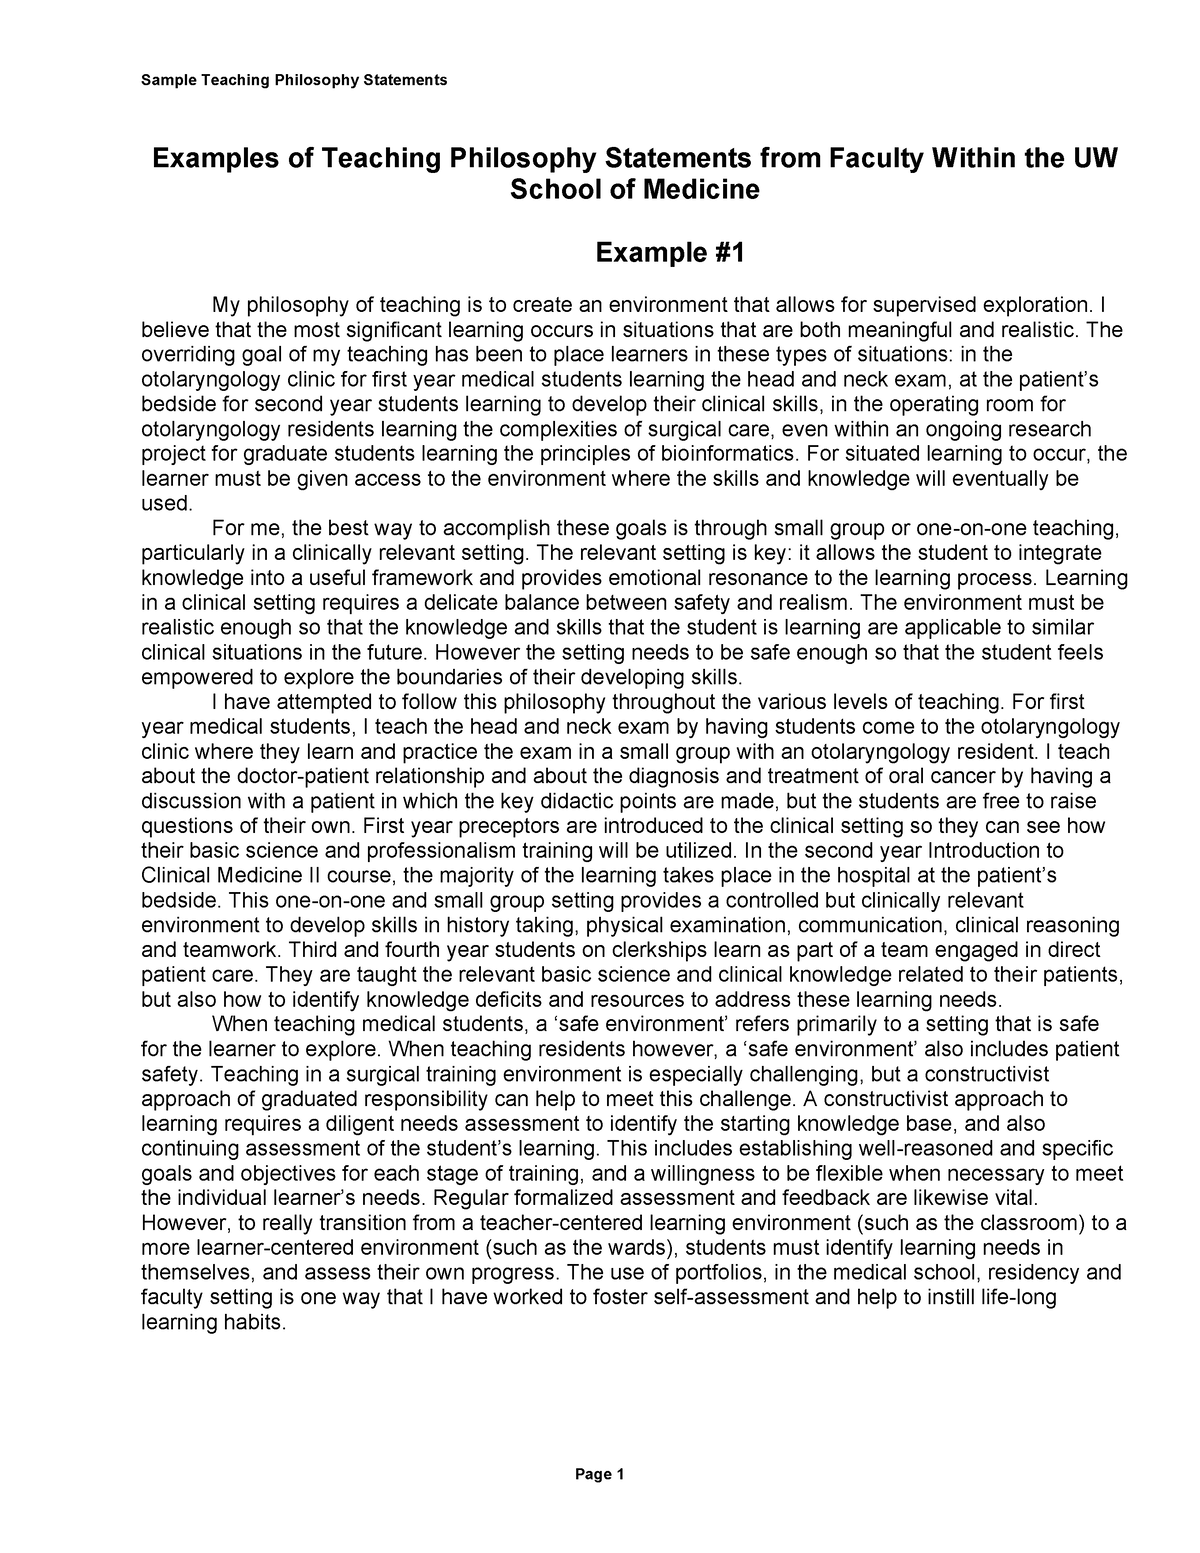 Sample Teaching Philosophy Statements Examples Of Teaching Philosophy Statements From Faculty